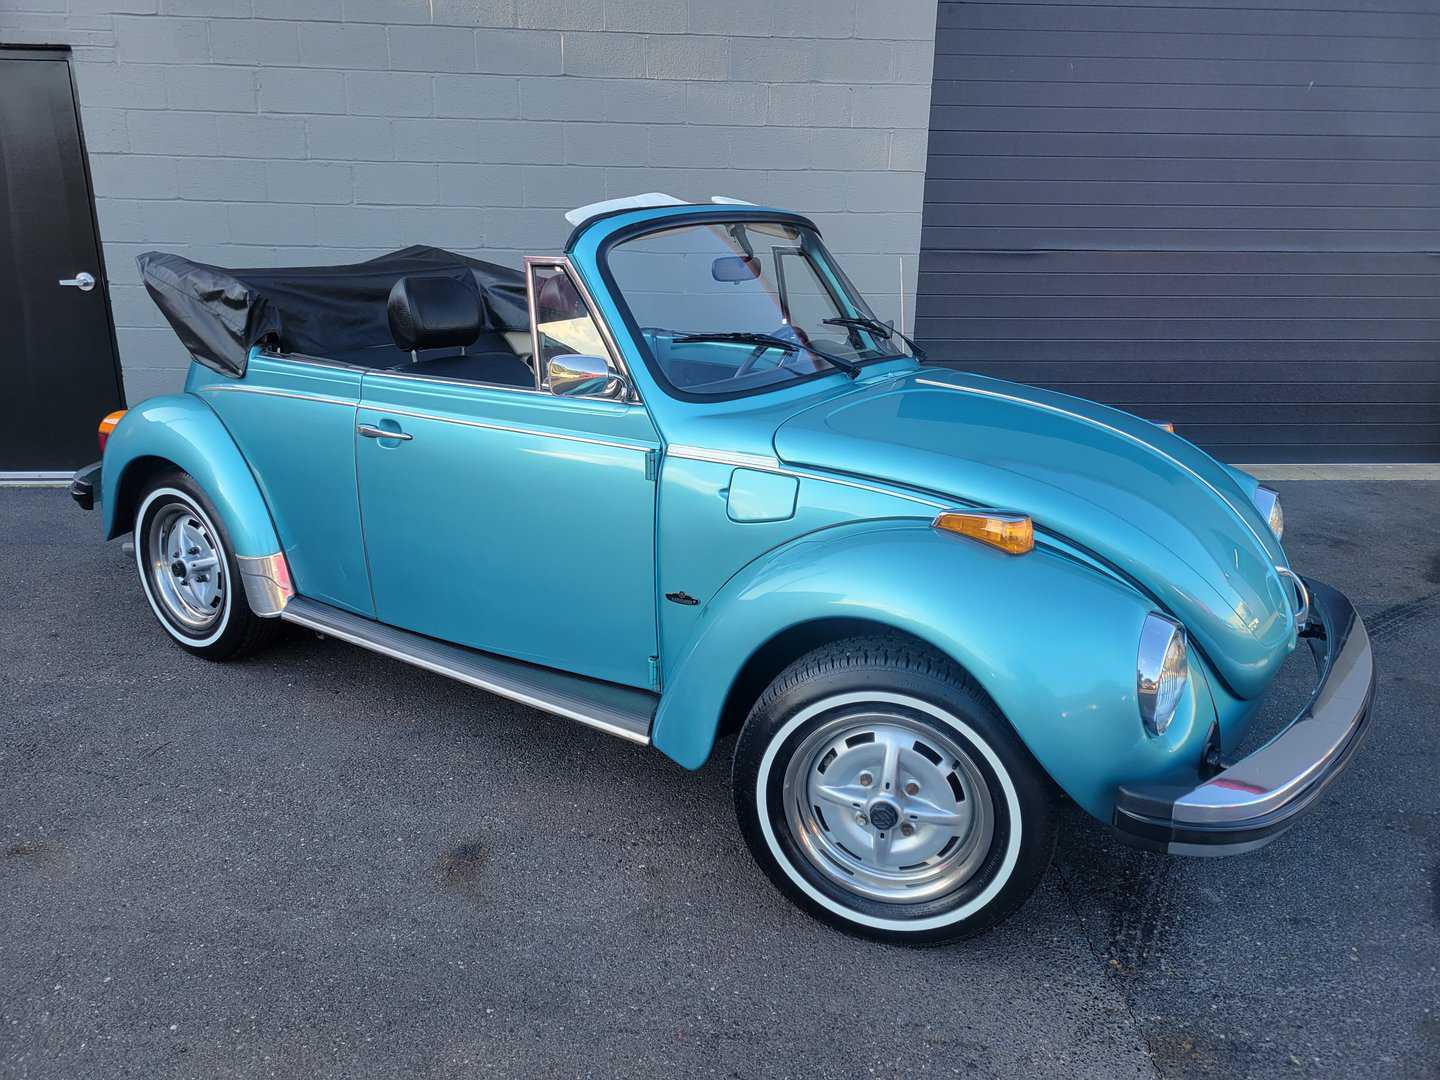 A 1979 blue Volkswagen Beetle Convertible parked in front of a building.